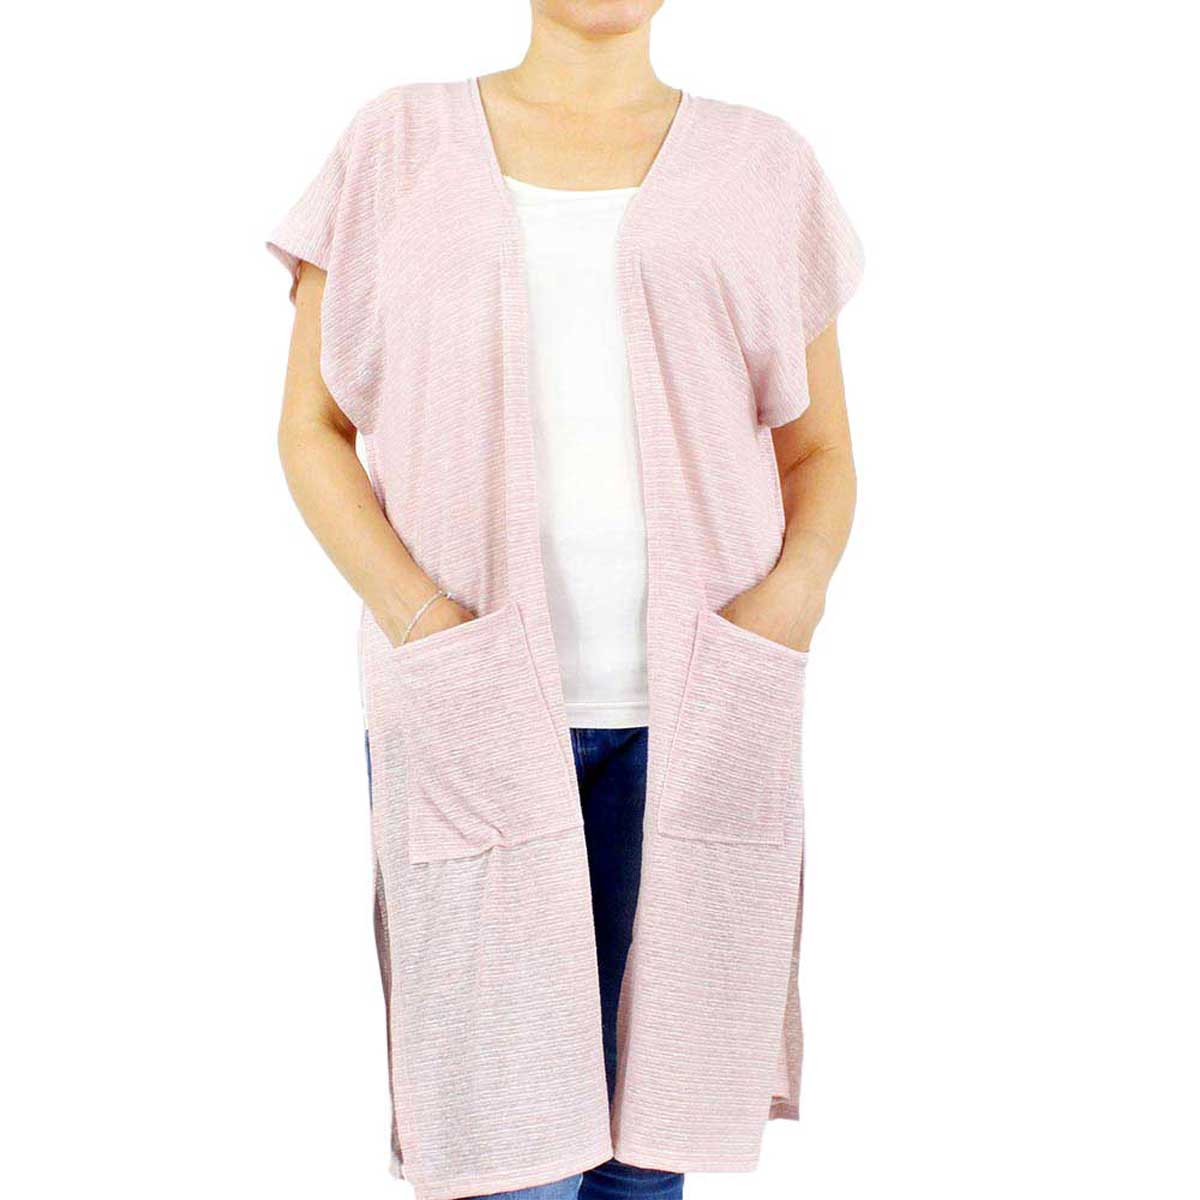 Pink Front Pockets Jersey Vest. Lightweight and soft brushed fabric exterior fabric ,make you feel more  comfortable. Cute and trendy vest for women. Great for dating, daily wear, travel, office, work, outwear, fall, spring or early winter. Perfect Gift for Wife, Mom, Birthday, Holiday, Anniversary, Fun Night Out.